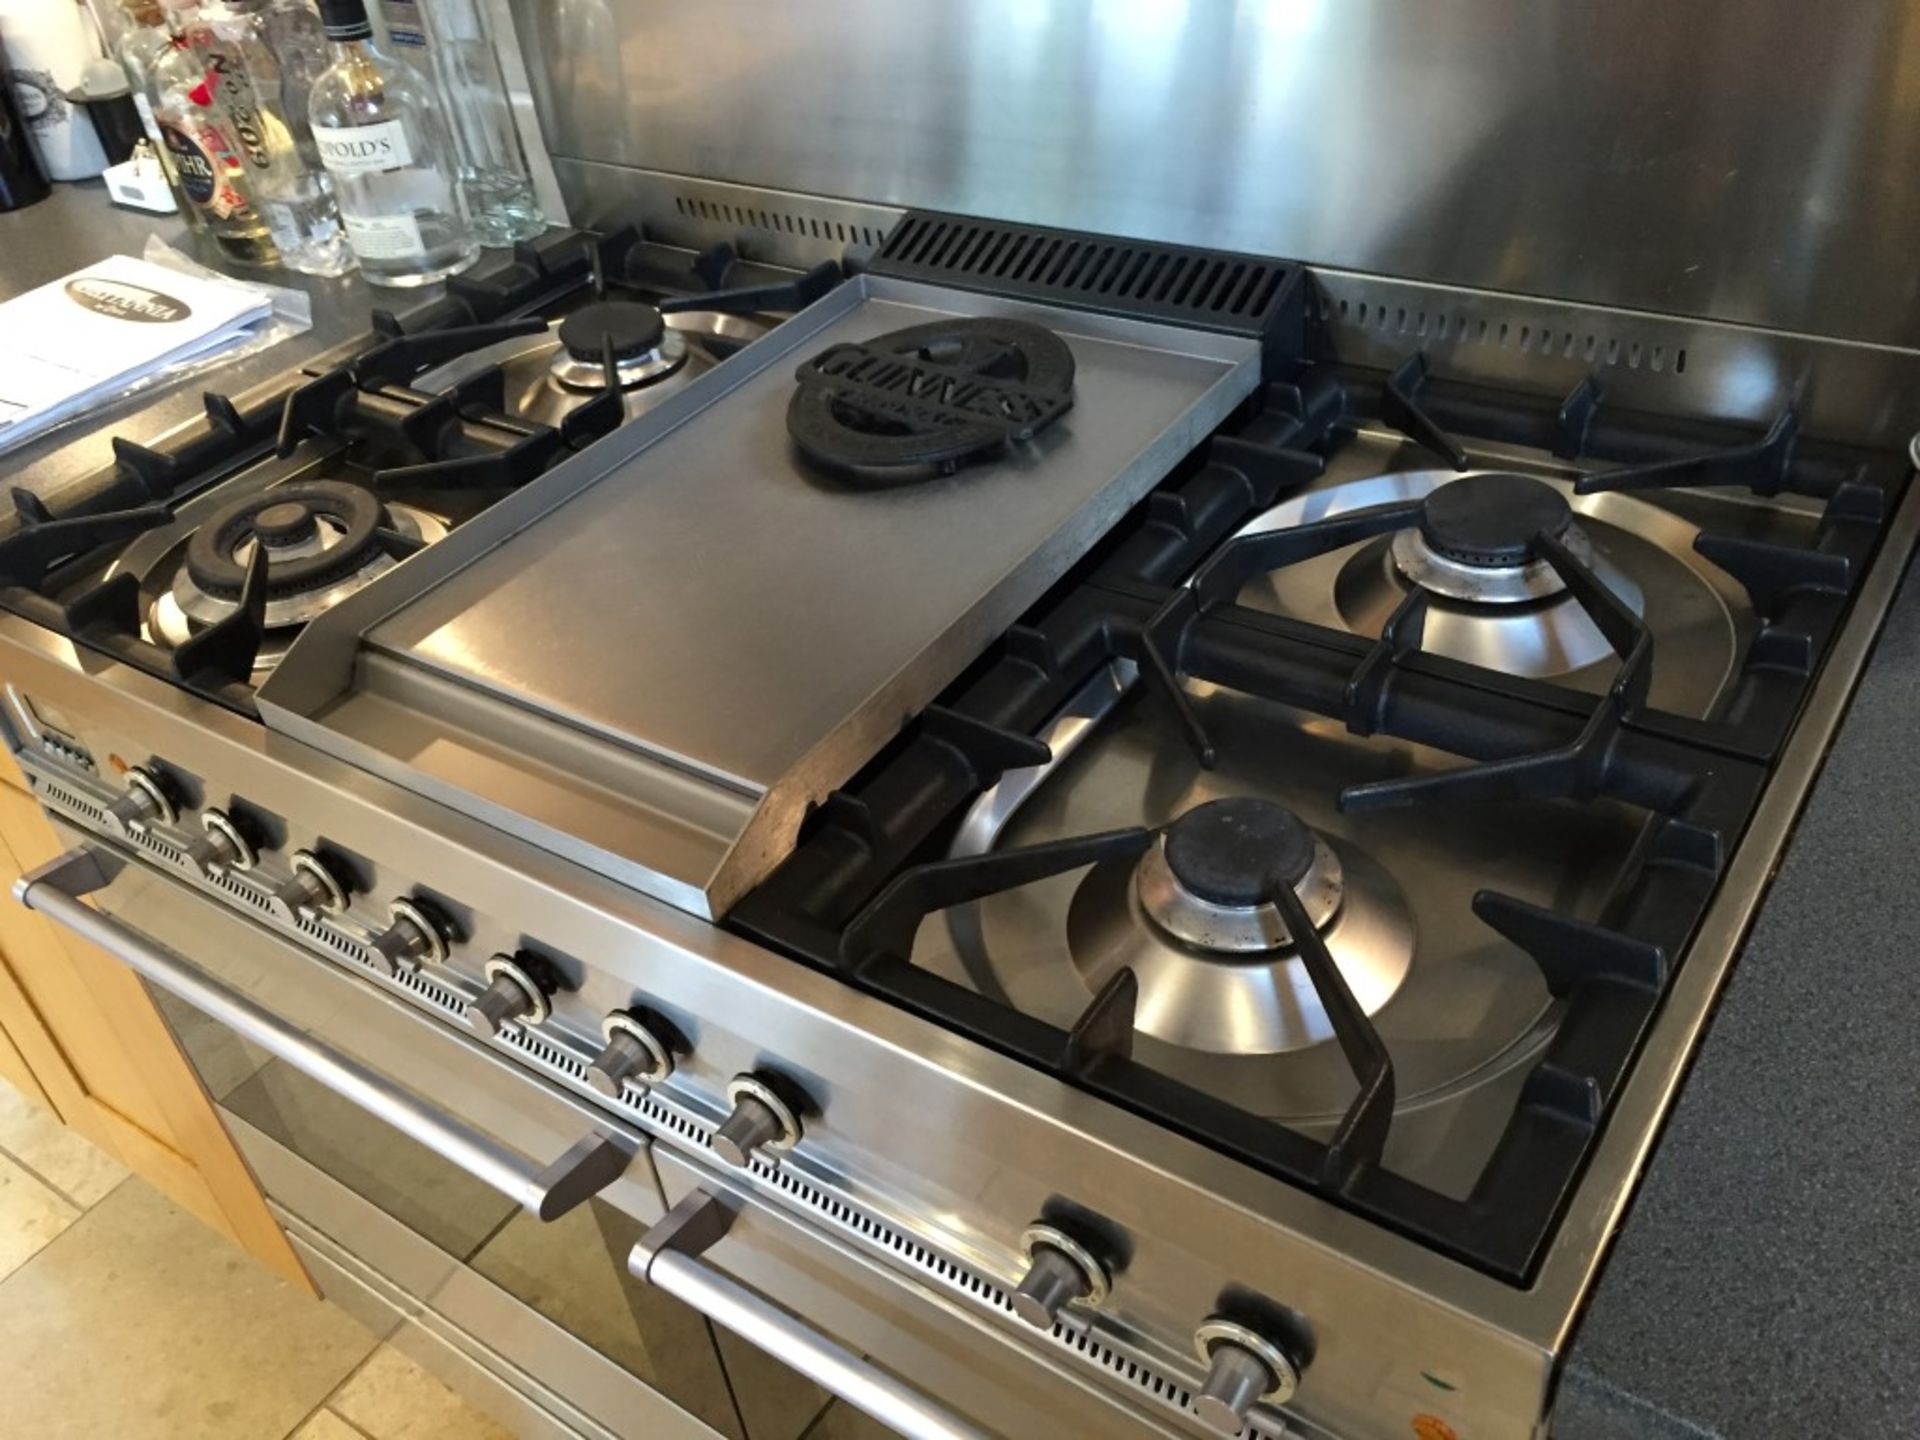 1 x Britannia Classic Range Cooker With Britannia Extractor Hood - Excellent Working Condition - Image 2 of 11